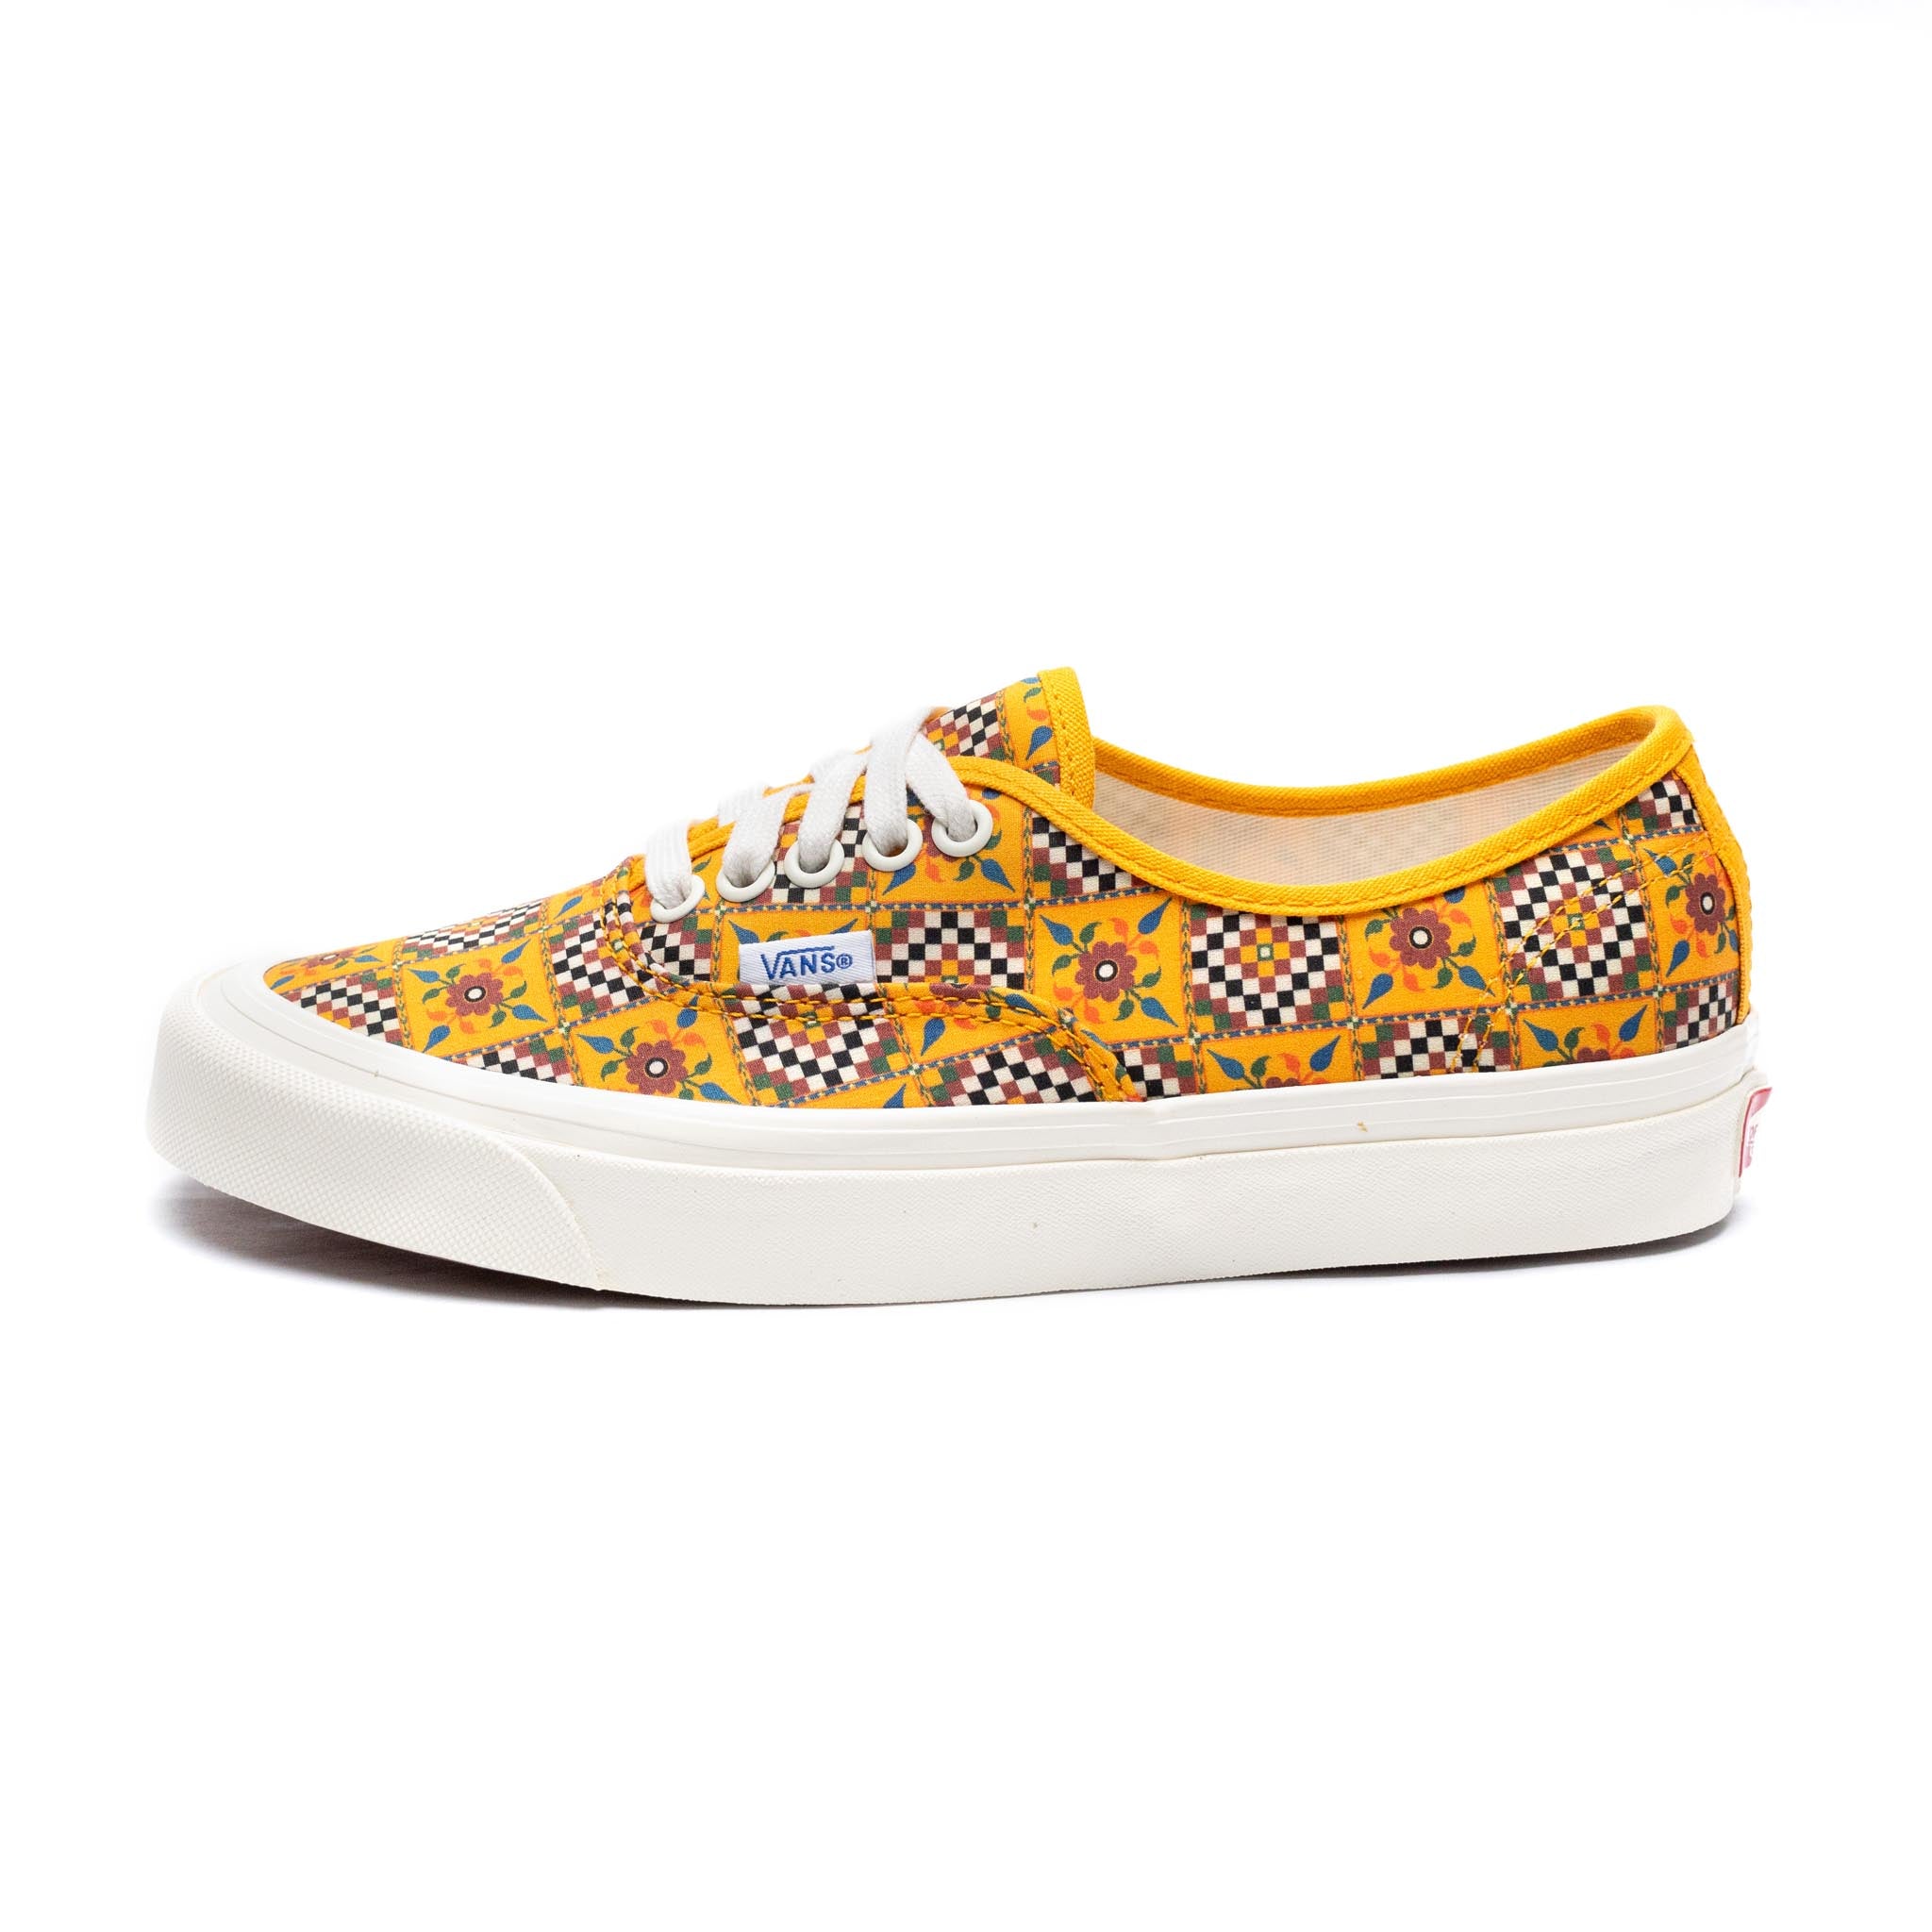 Vans Anaheim Factory Authentic 44 DX Tile Checkerboard/Radiant Yellow